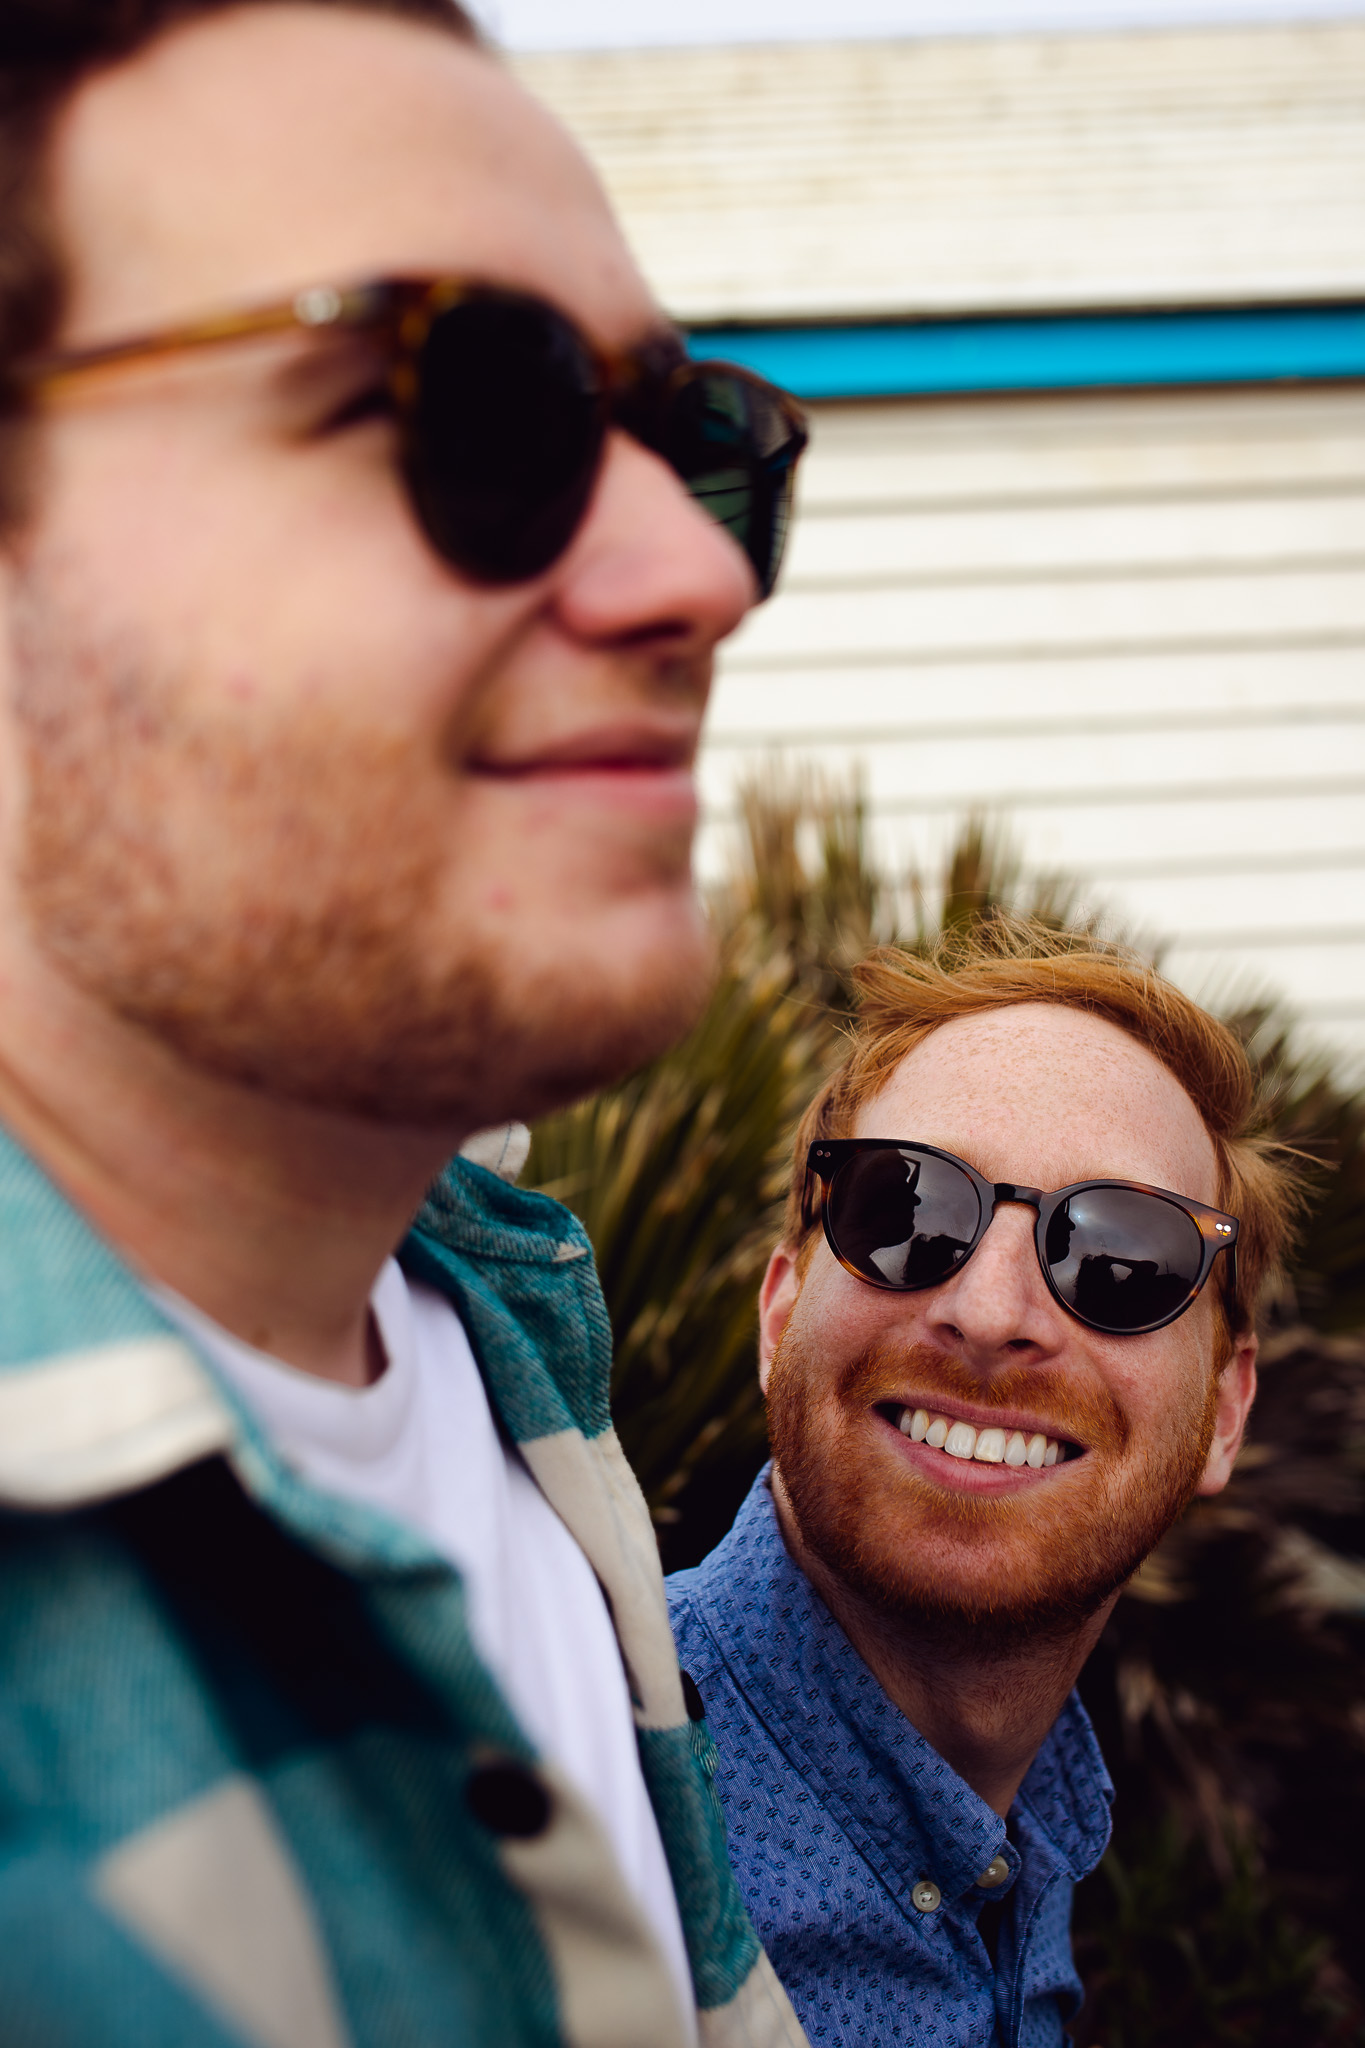 Engagement session of an LGBTQ+ couple wearing sunglasses and smiling